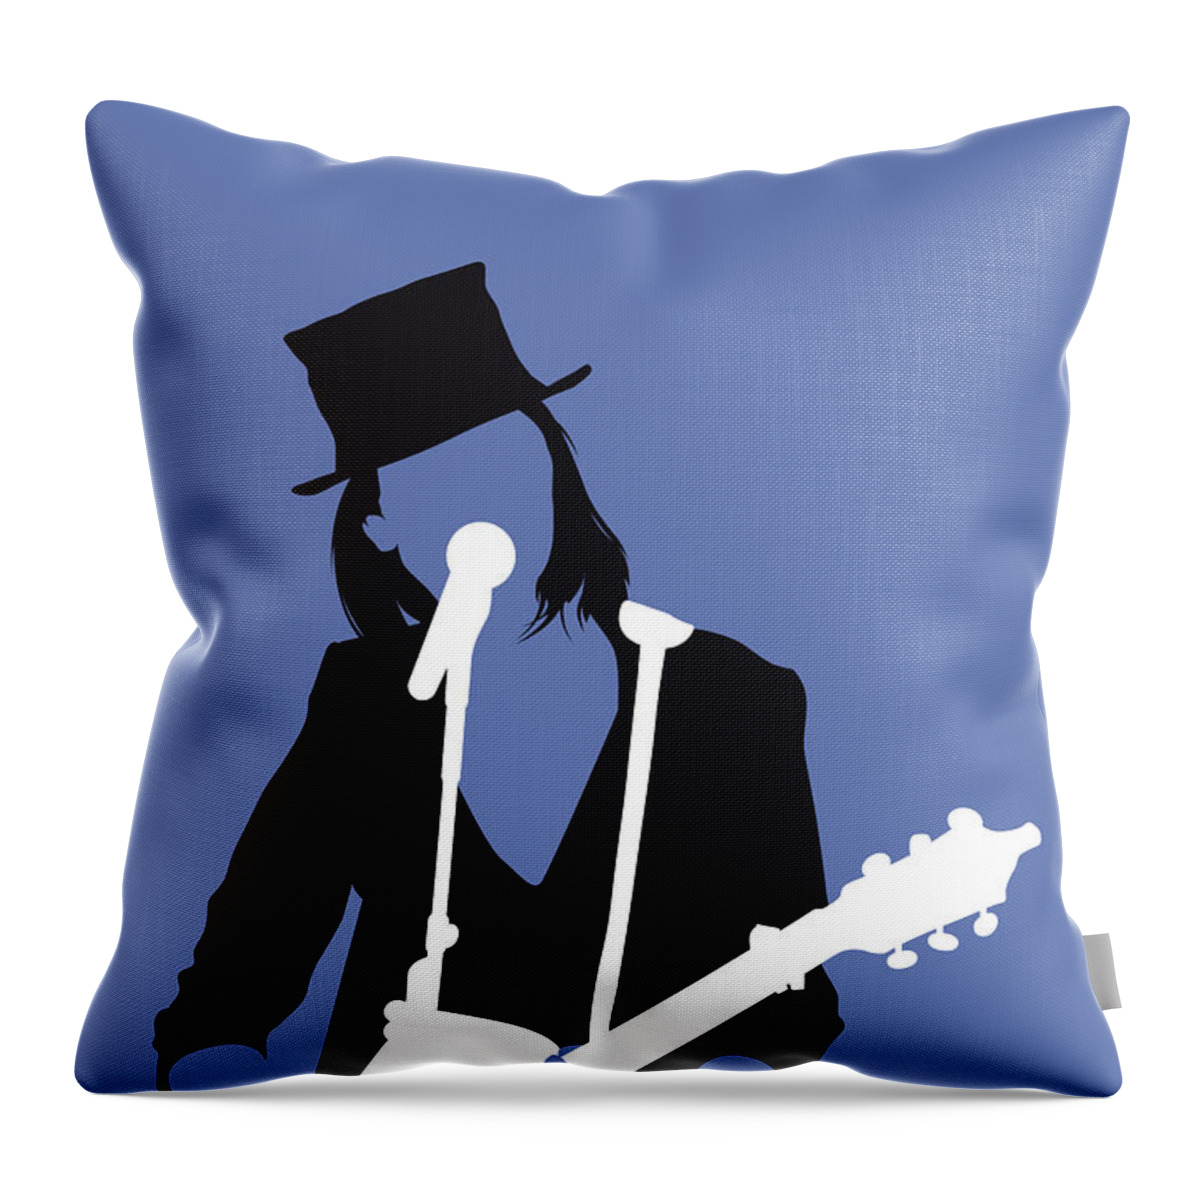 Suzanne Throw Pillow featuring the digital art No298 MY Suzanne Vega Minimal Music poster by Chungkong Art